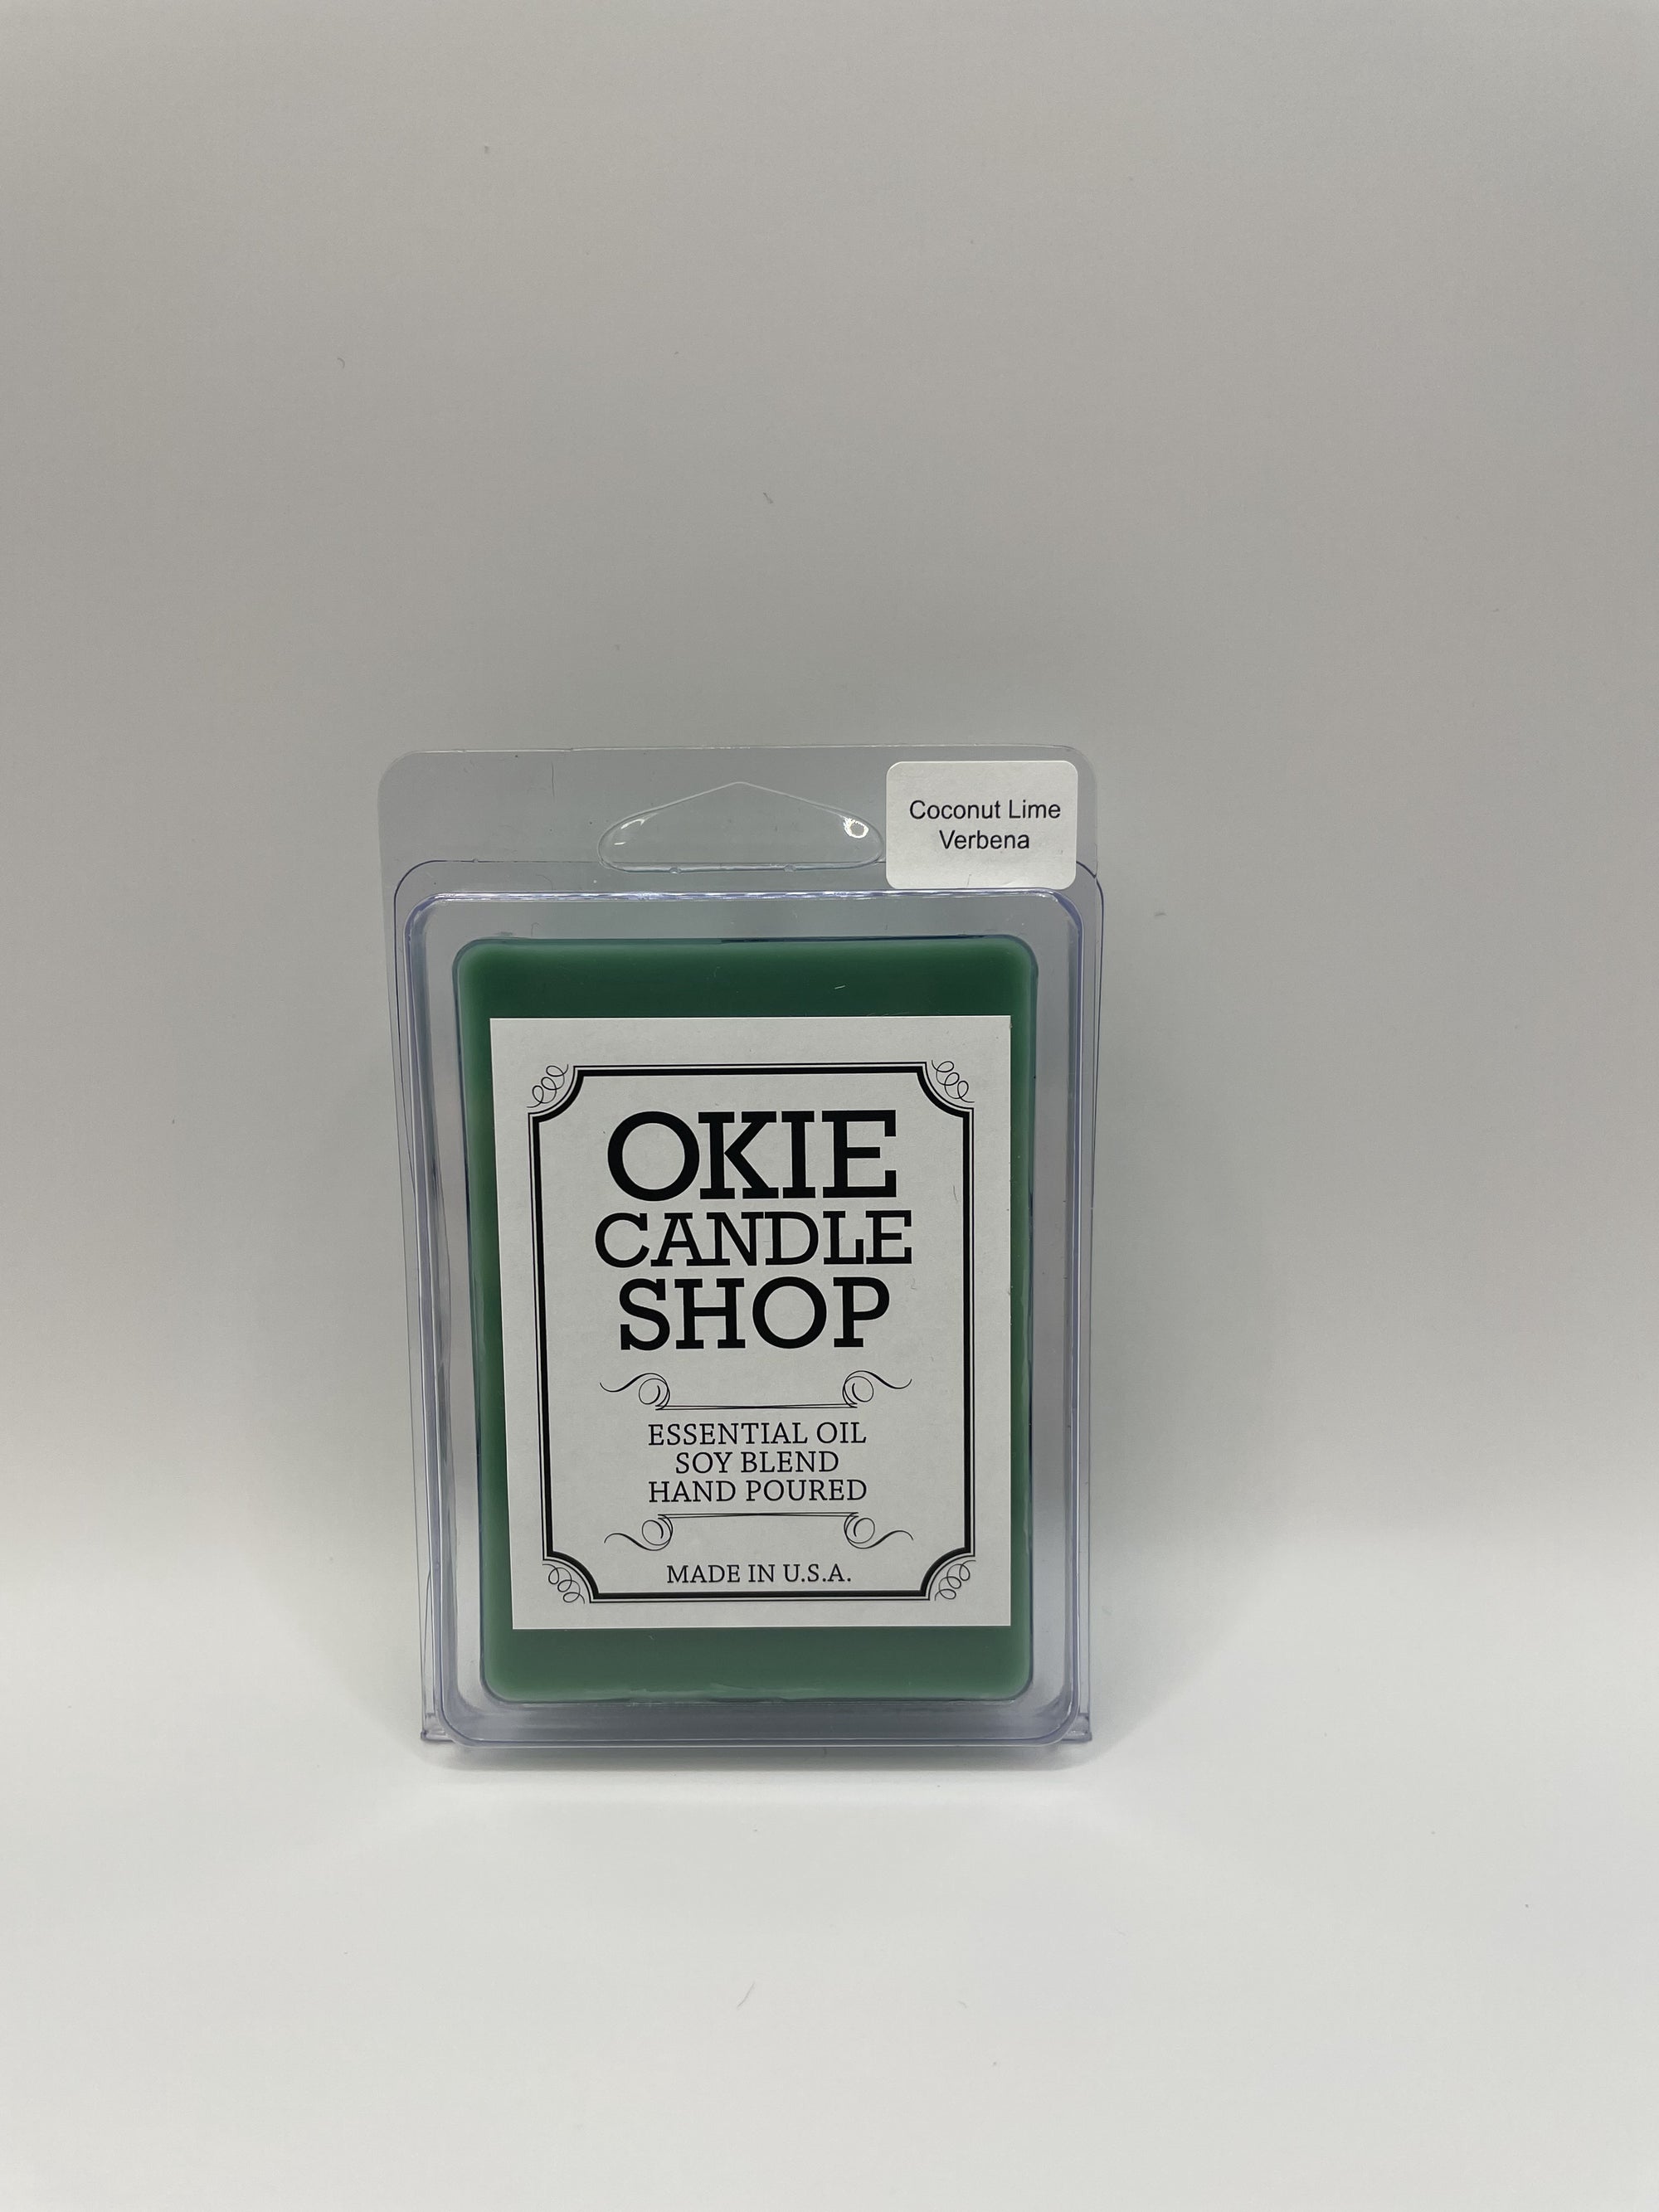 Okie Candle Coconut Lime Verbena - Wax Melts